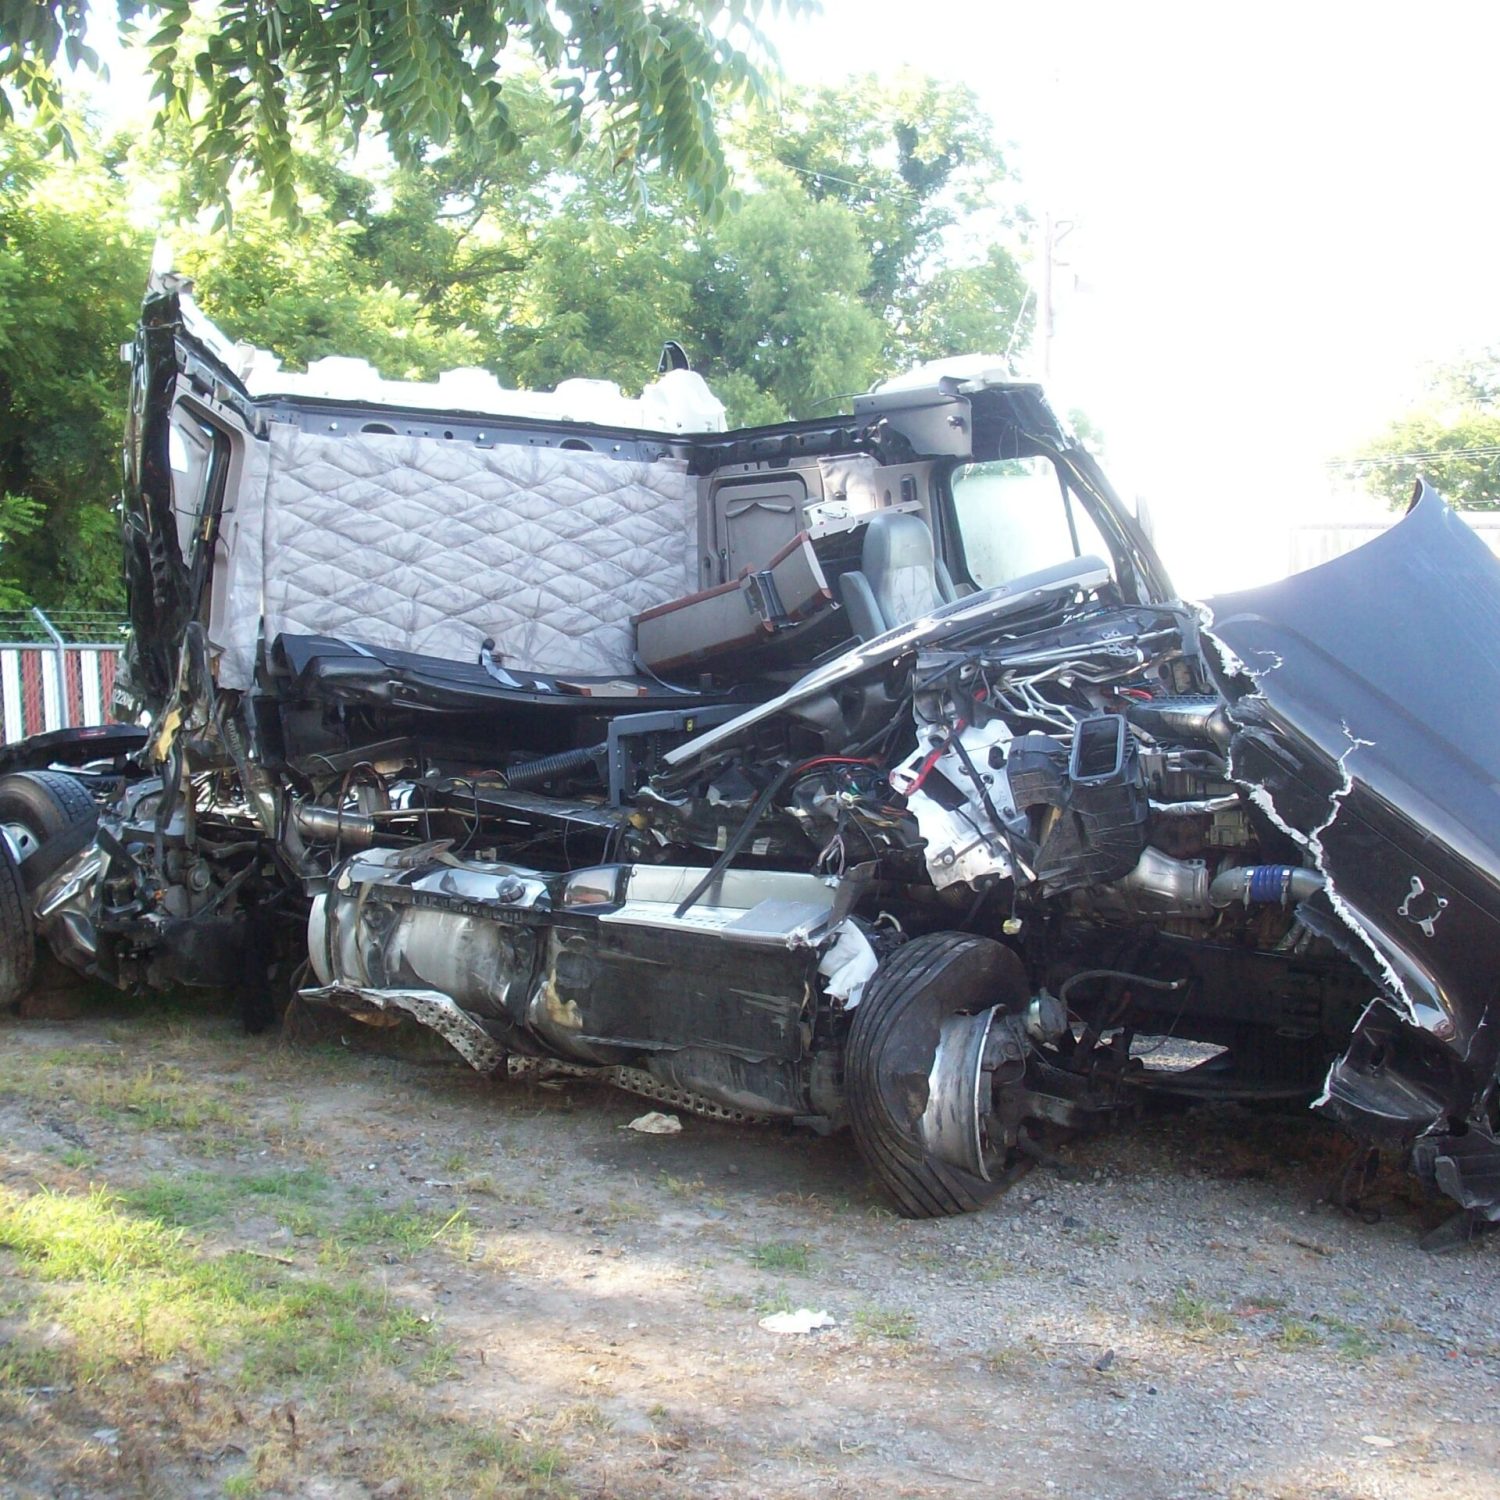 Truck rolled over, tore open and yet the driver was uninjured because he was belted.